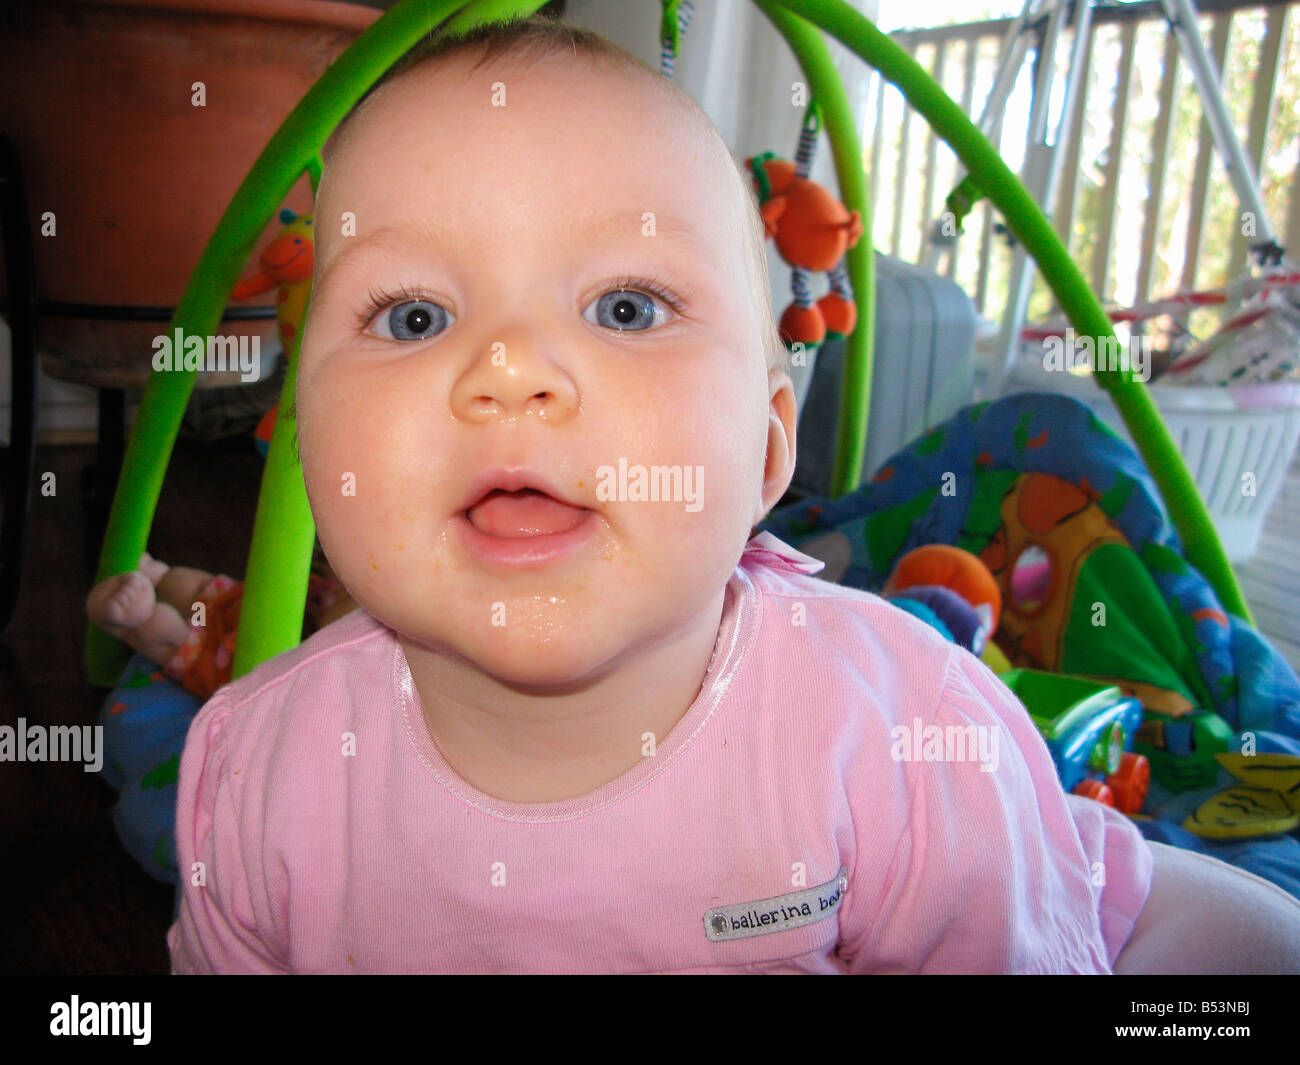 Portrait of baby girl looking at camera Stock Photo